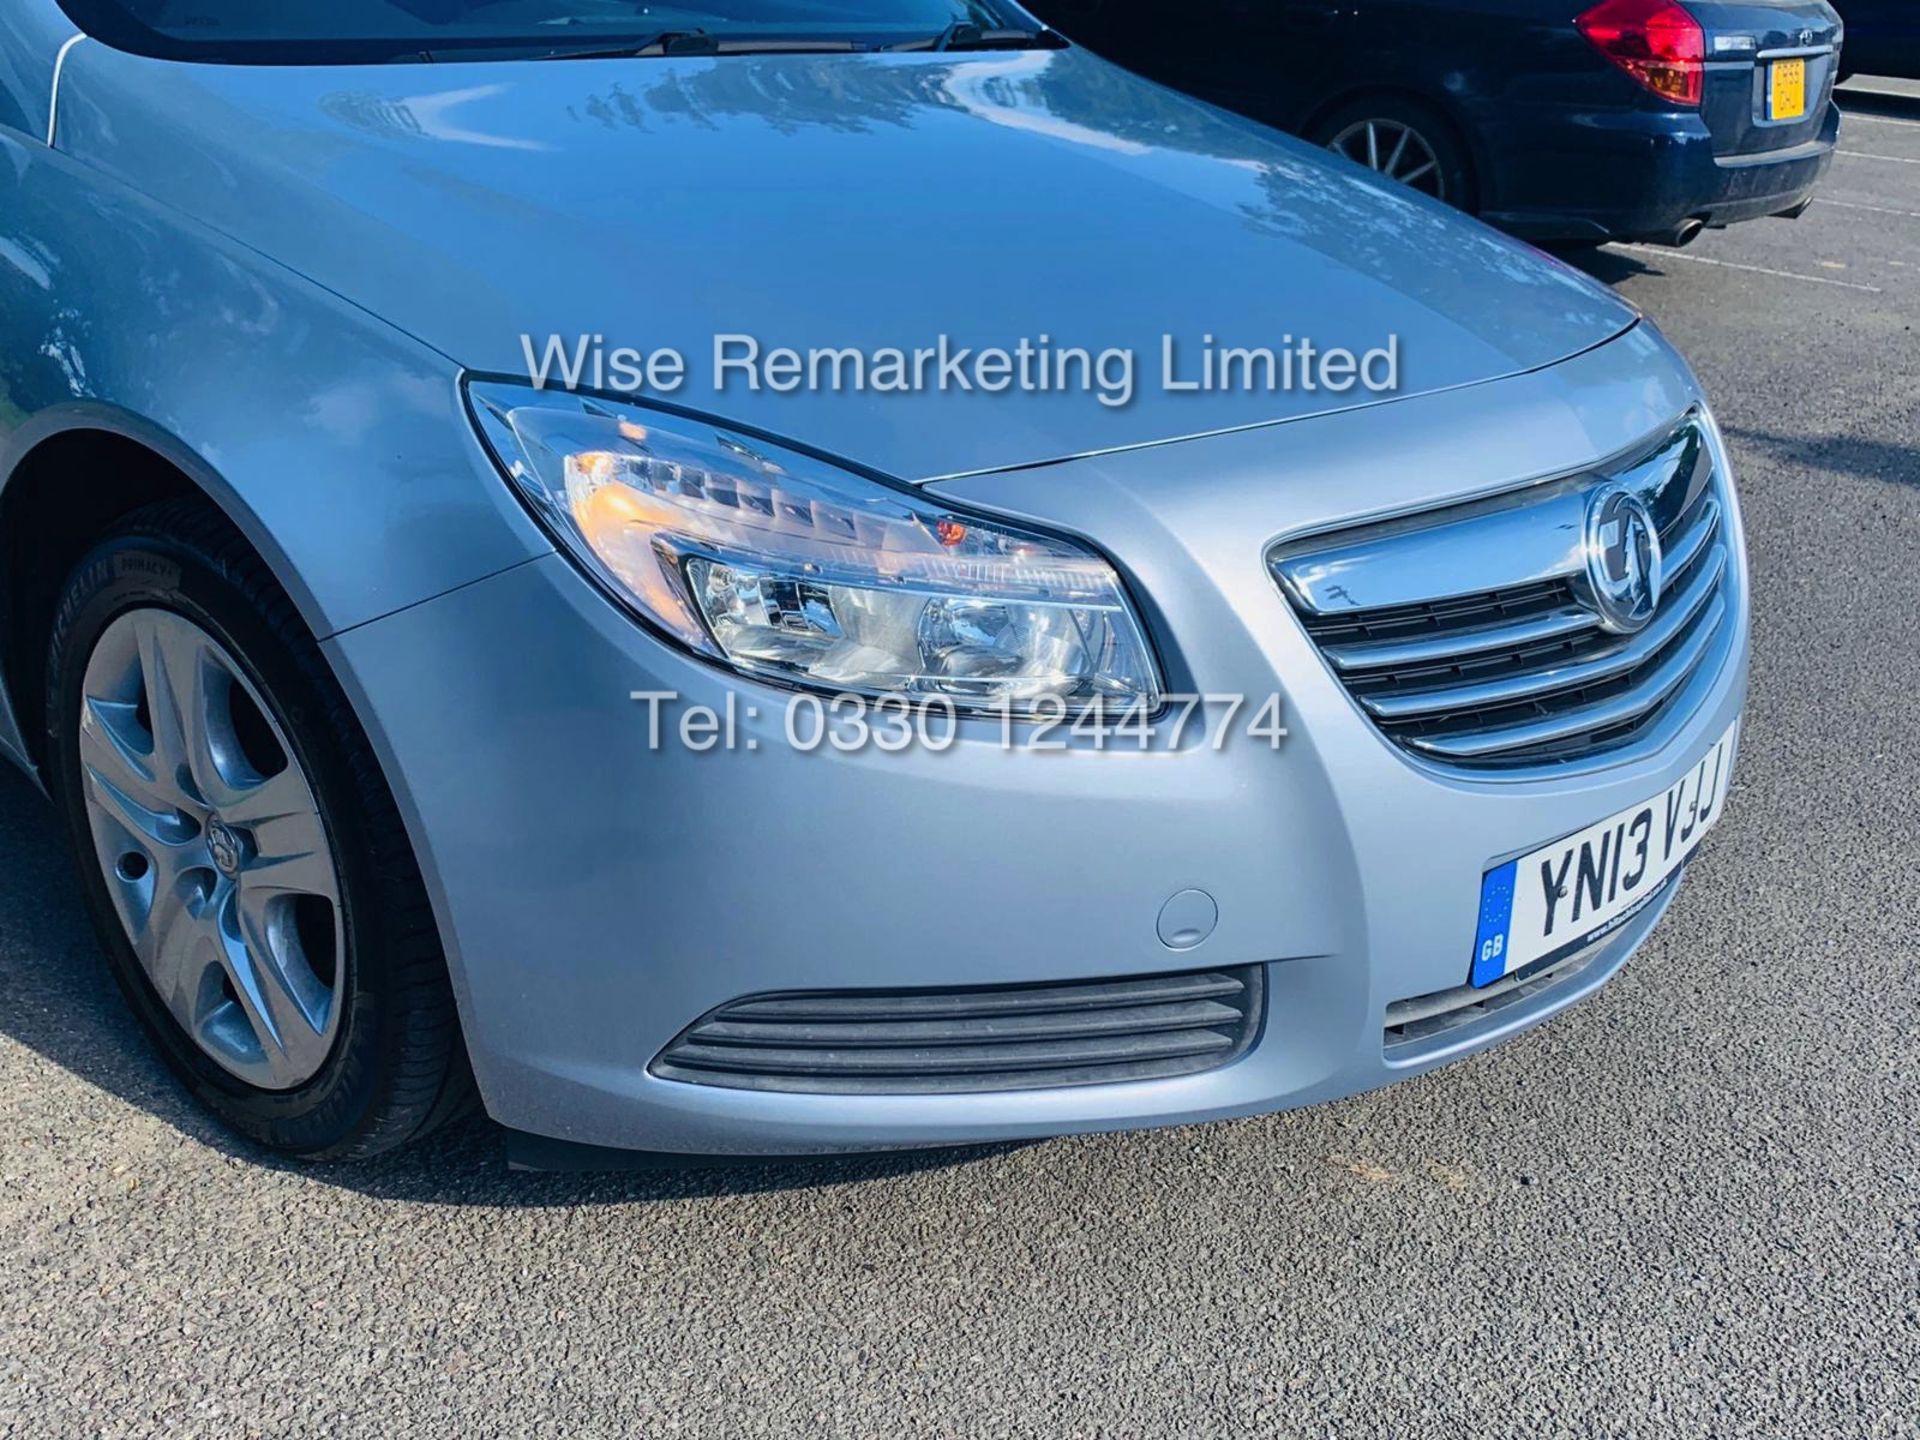 VAUXHALL INSIGNIA 2.0 CDTI ECOFLEX ES 2013 *FSH* 1 OWNER FROM NEW - Image 11 of 30